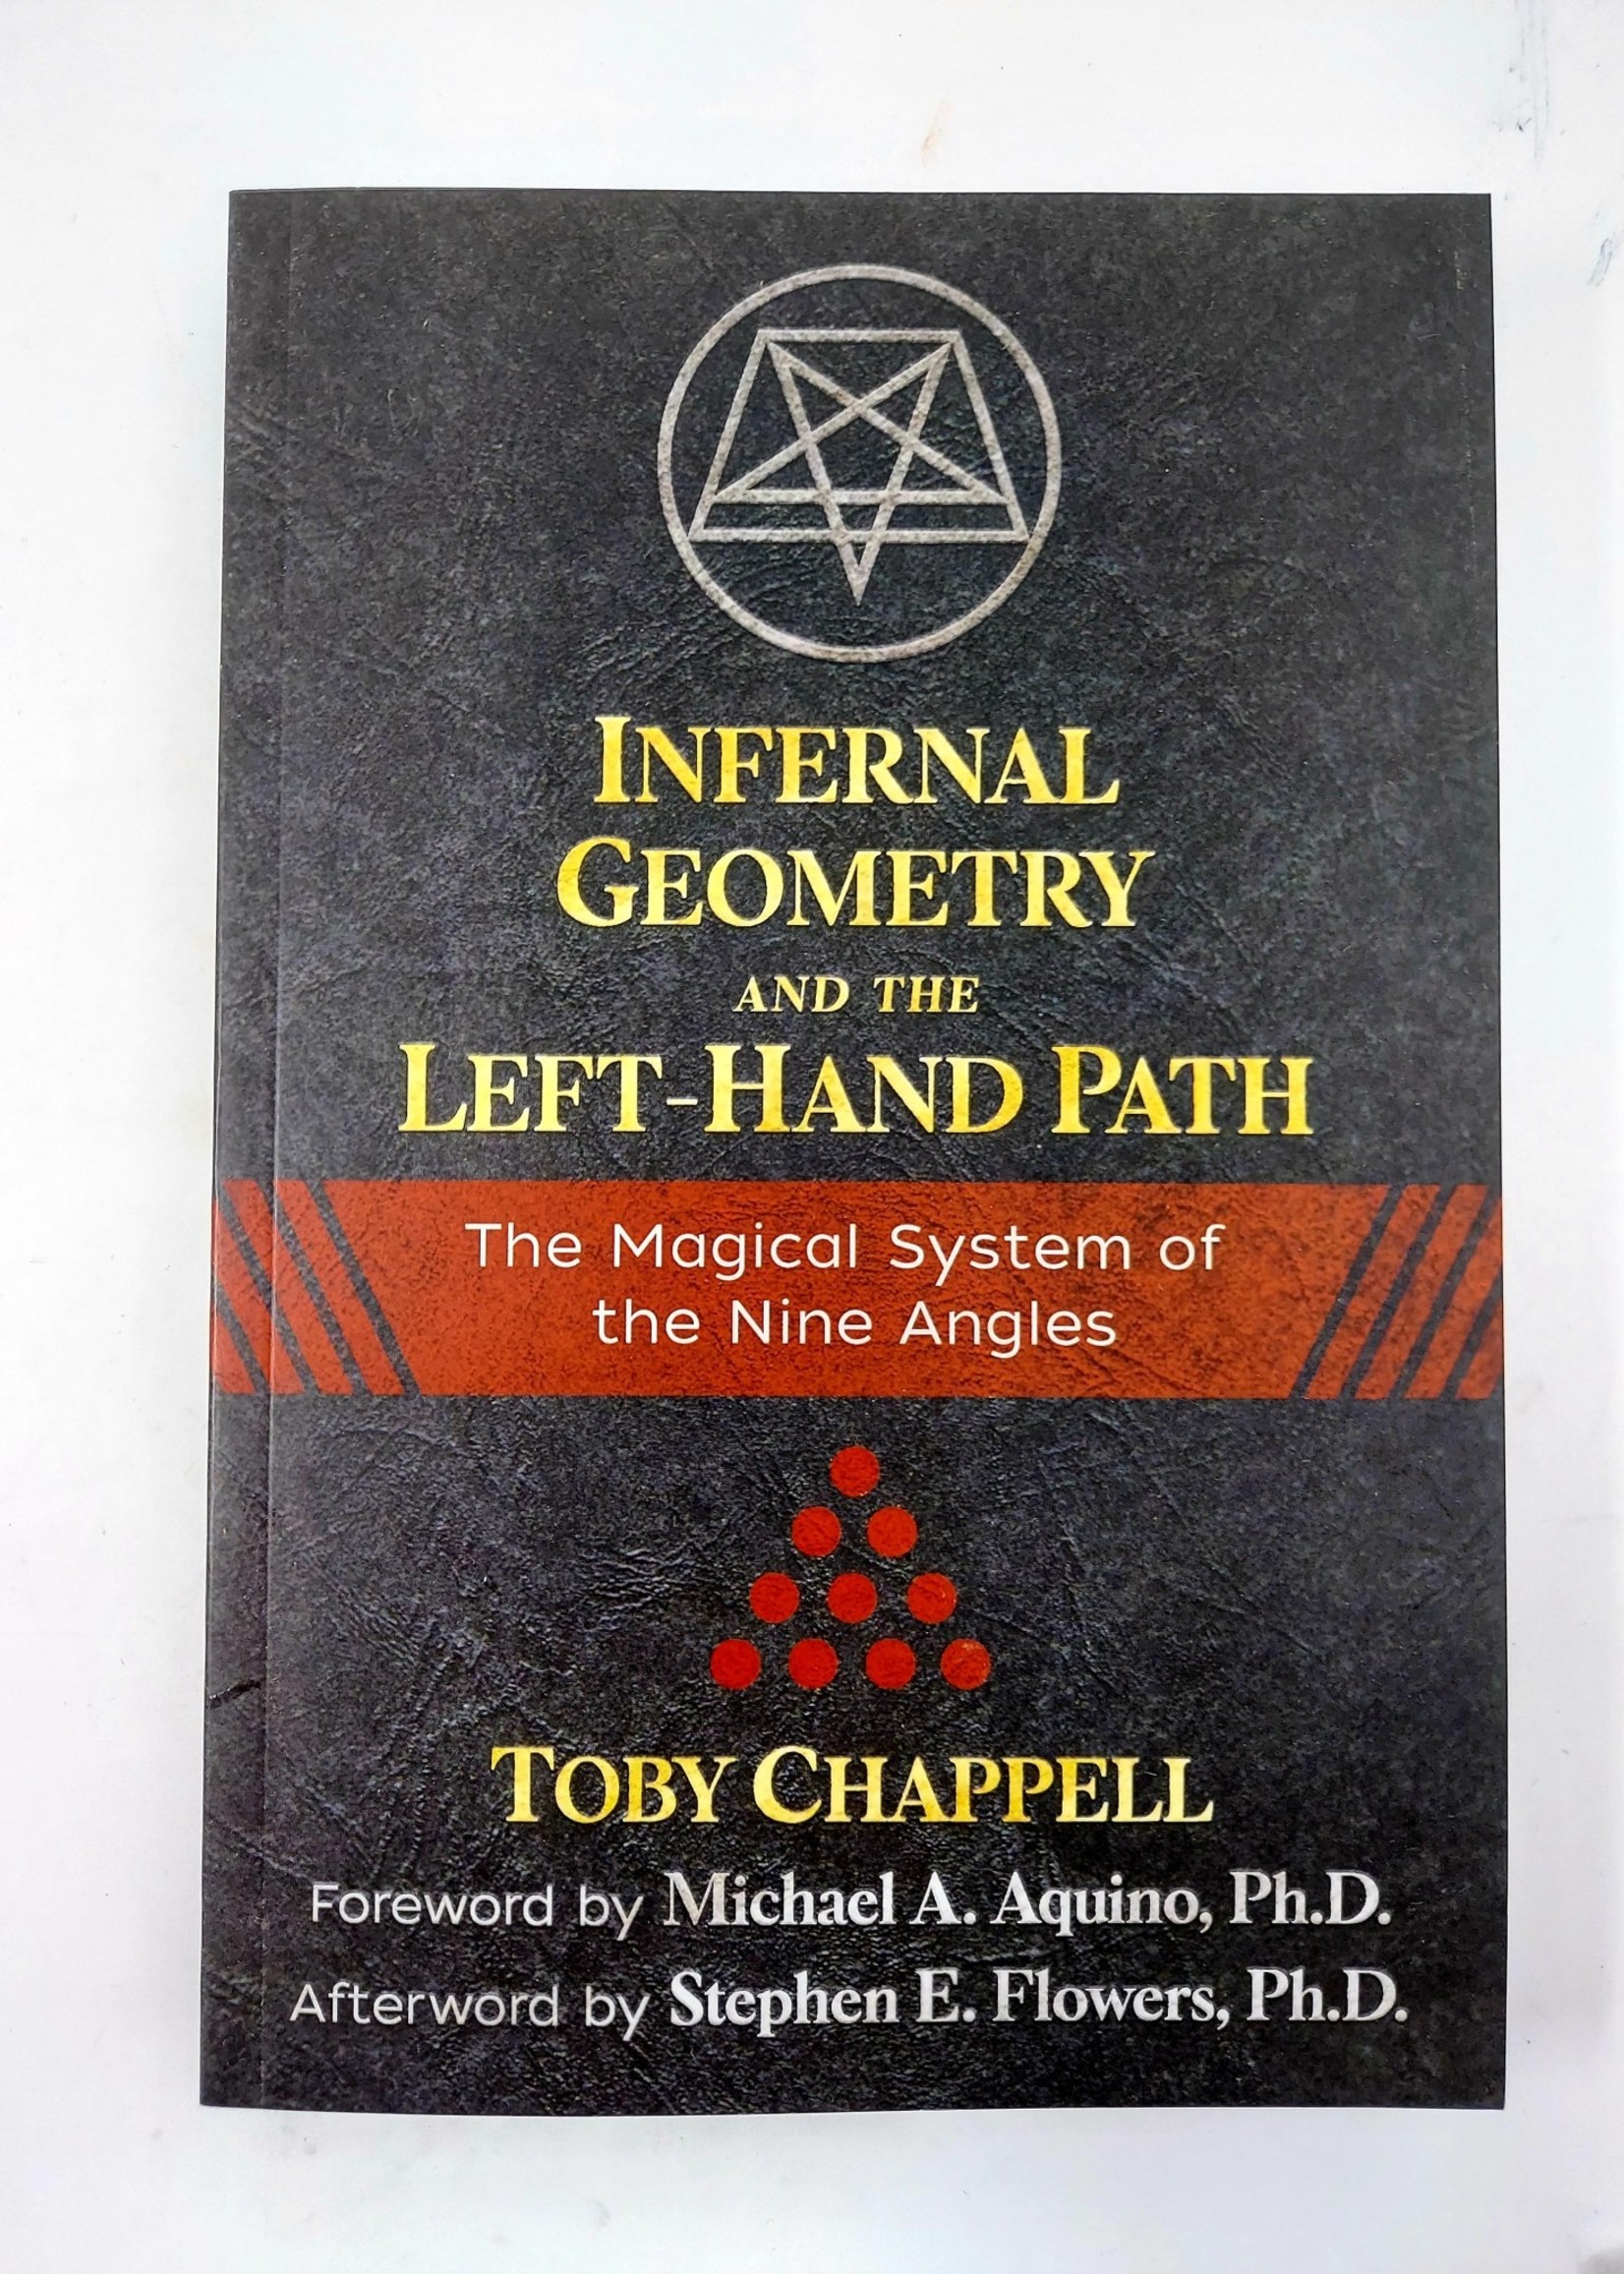 Infernal Geometry and the Left-Hand Path The Magical System of the Nine Angles Toby Chappel